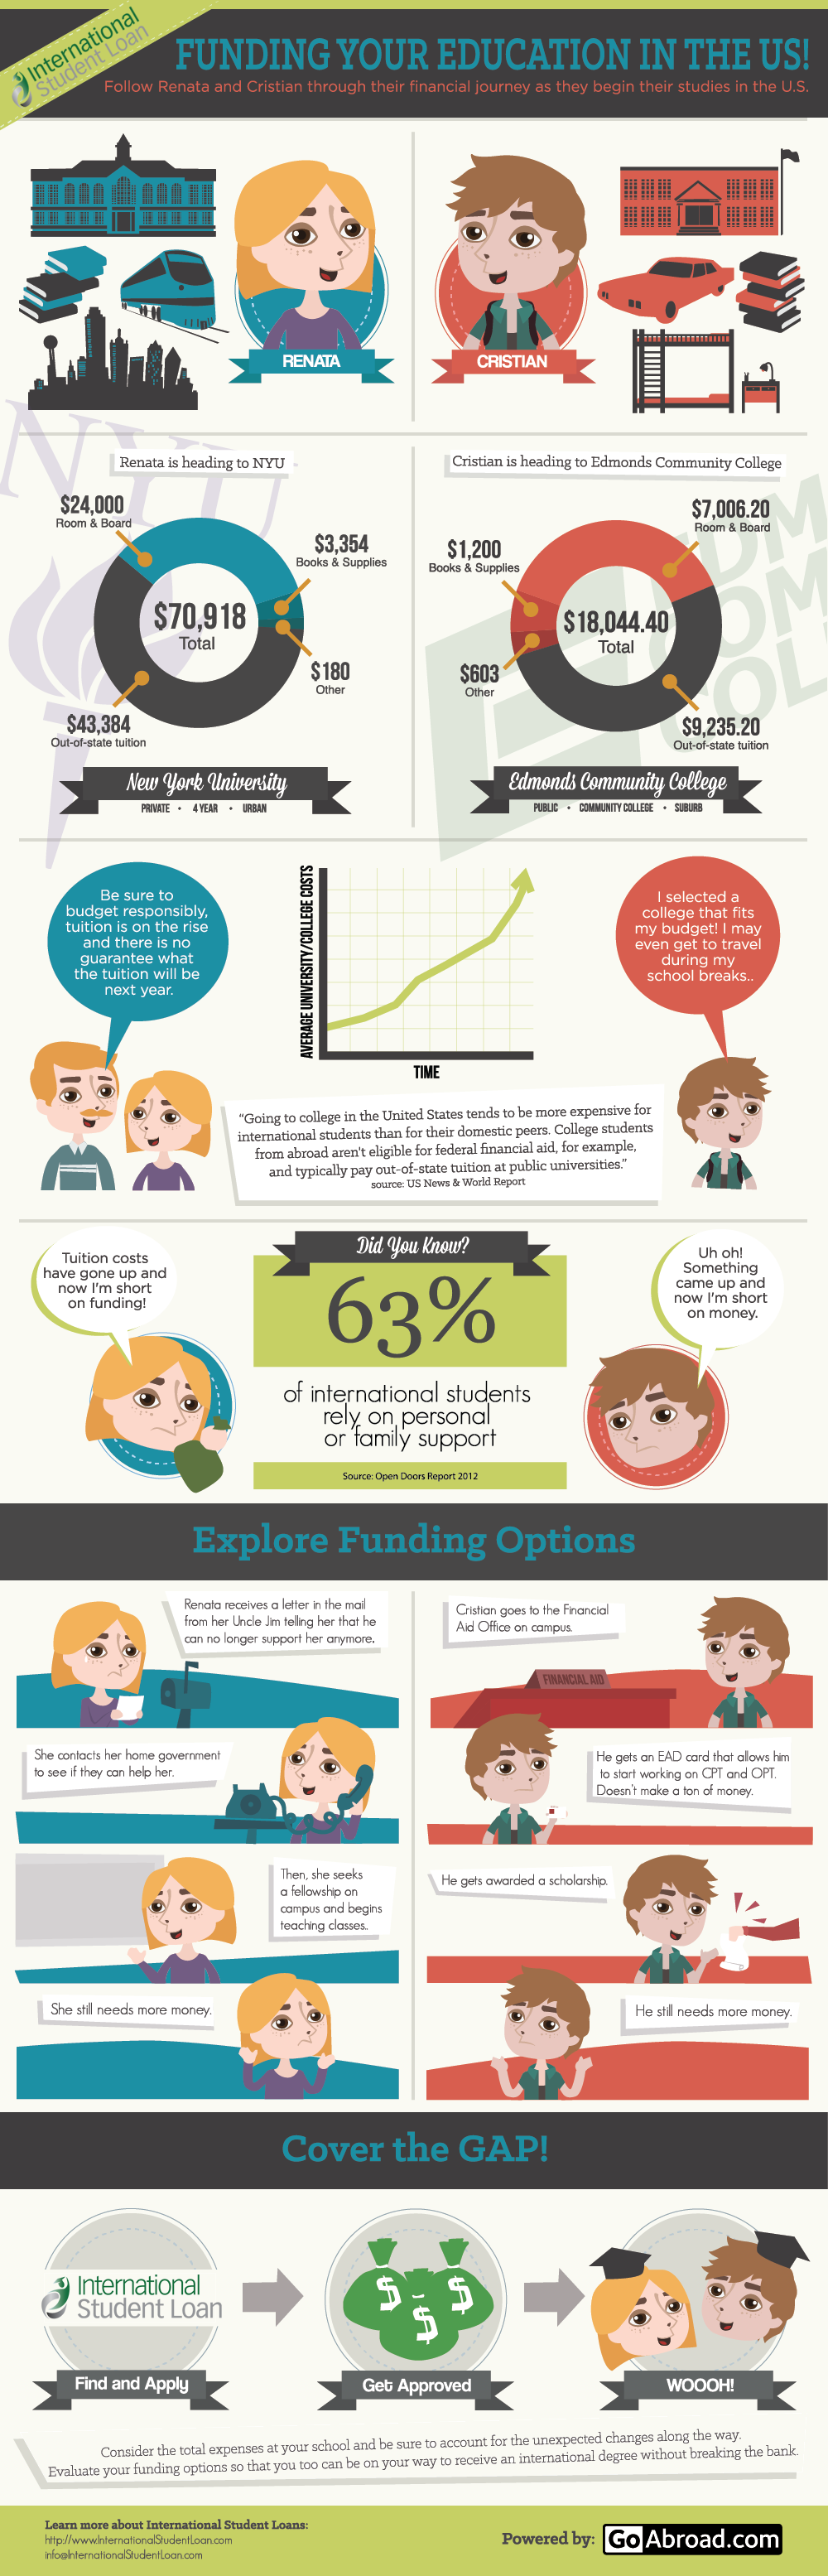 Infographic: Fund Your Education in the USA